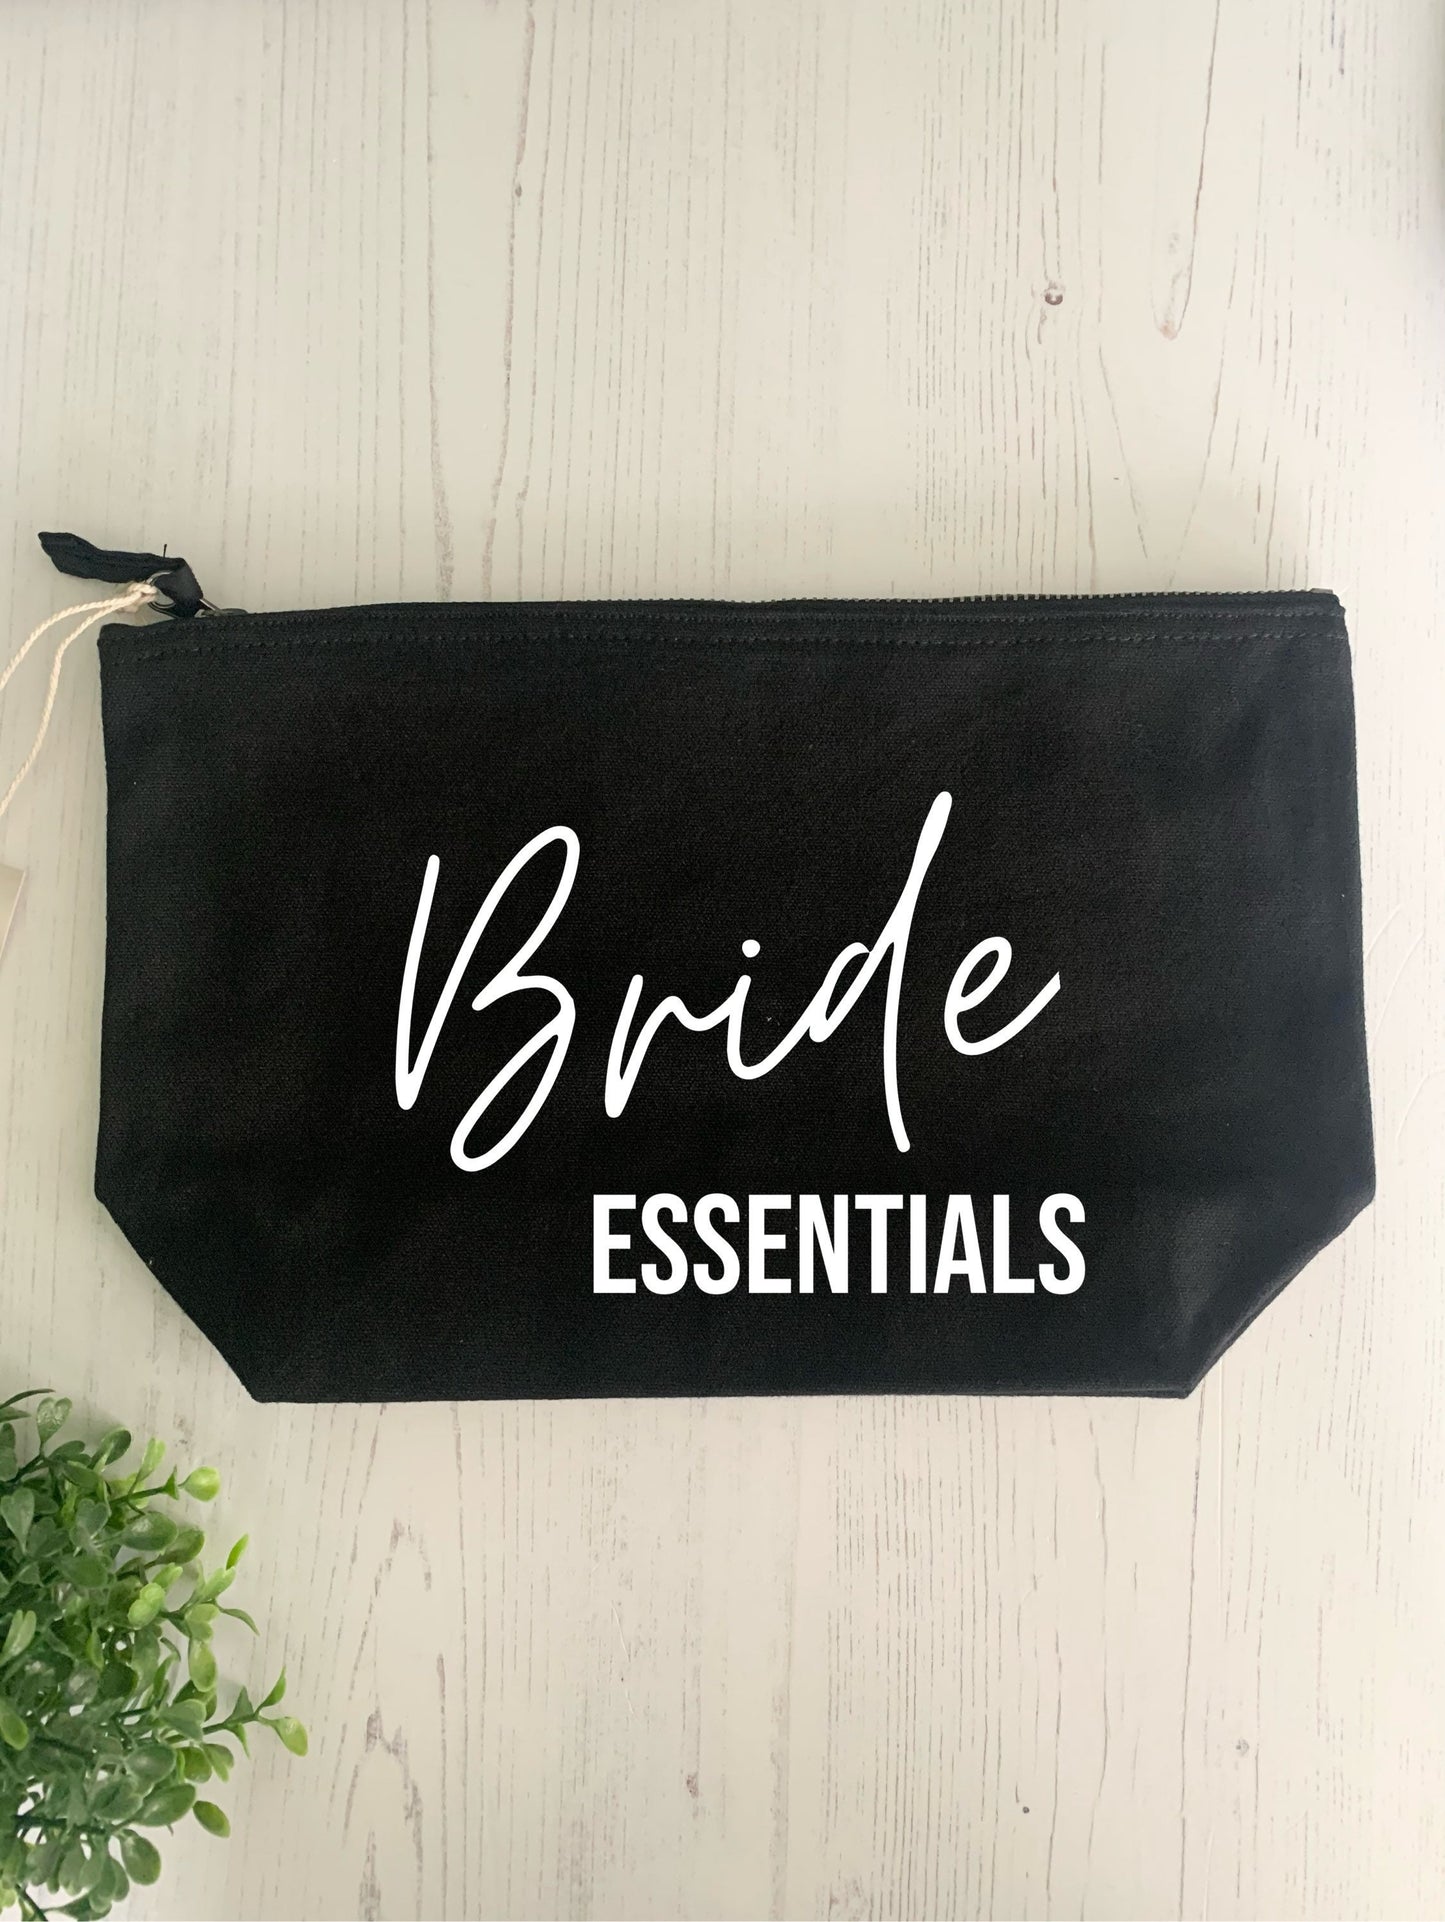 bride essentials make up case, bride wedding morning cosmetic case, gift for bride to be, bridal accessories, bridesmaid gifts, black bag